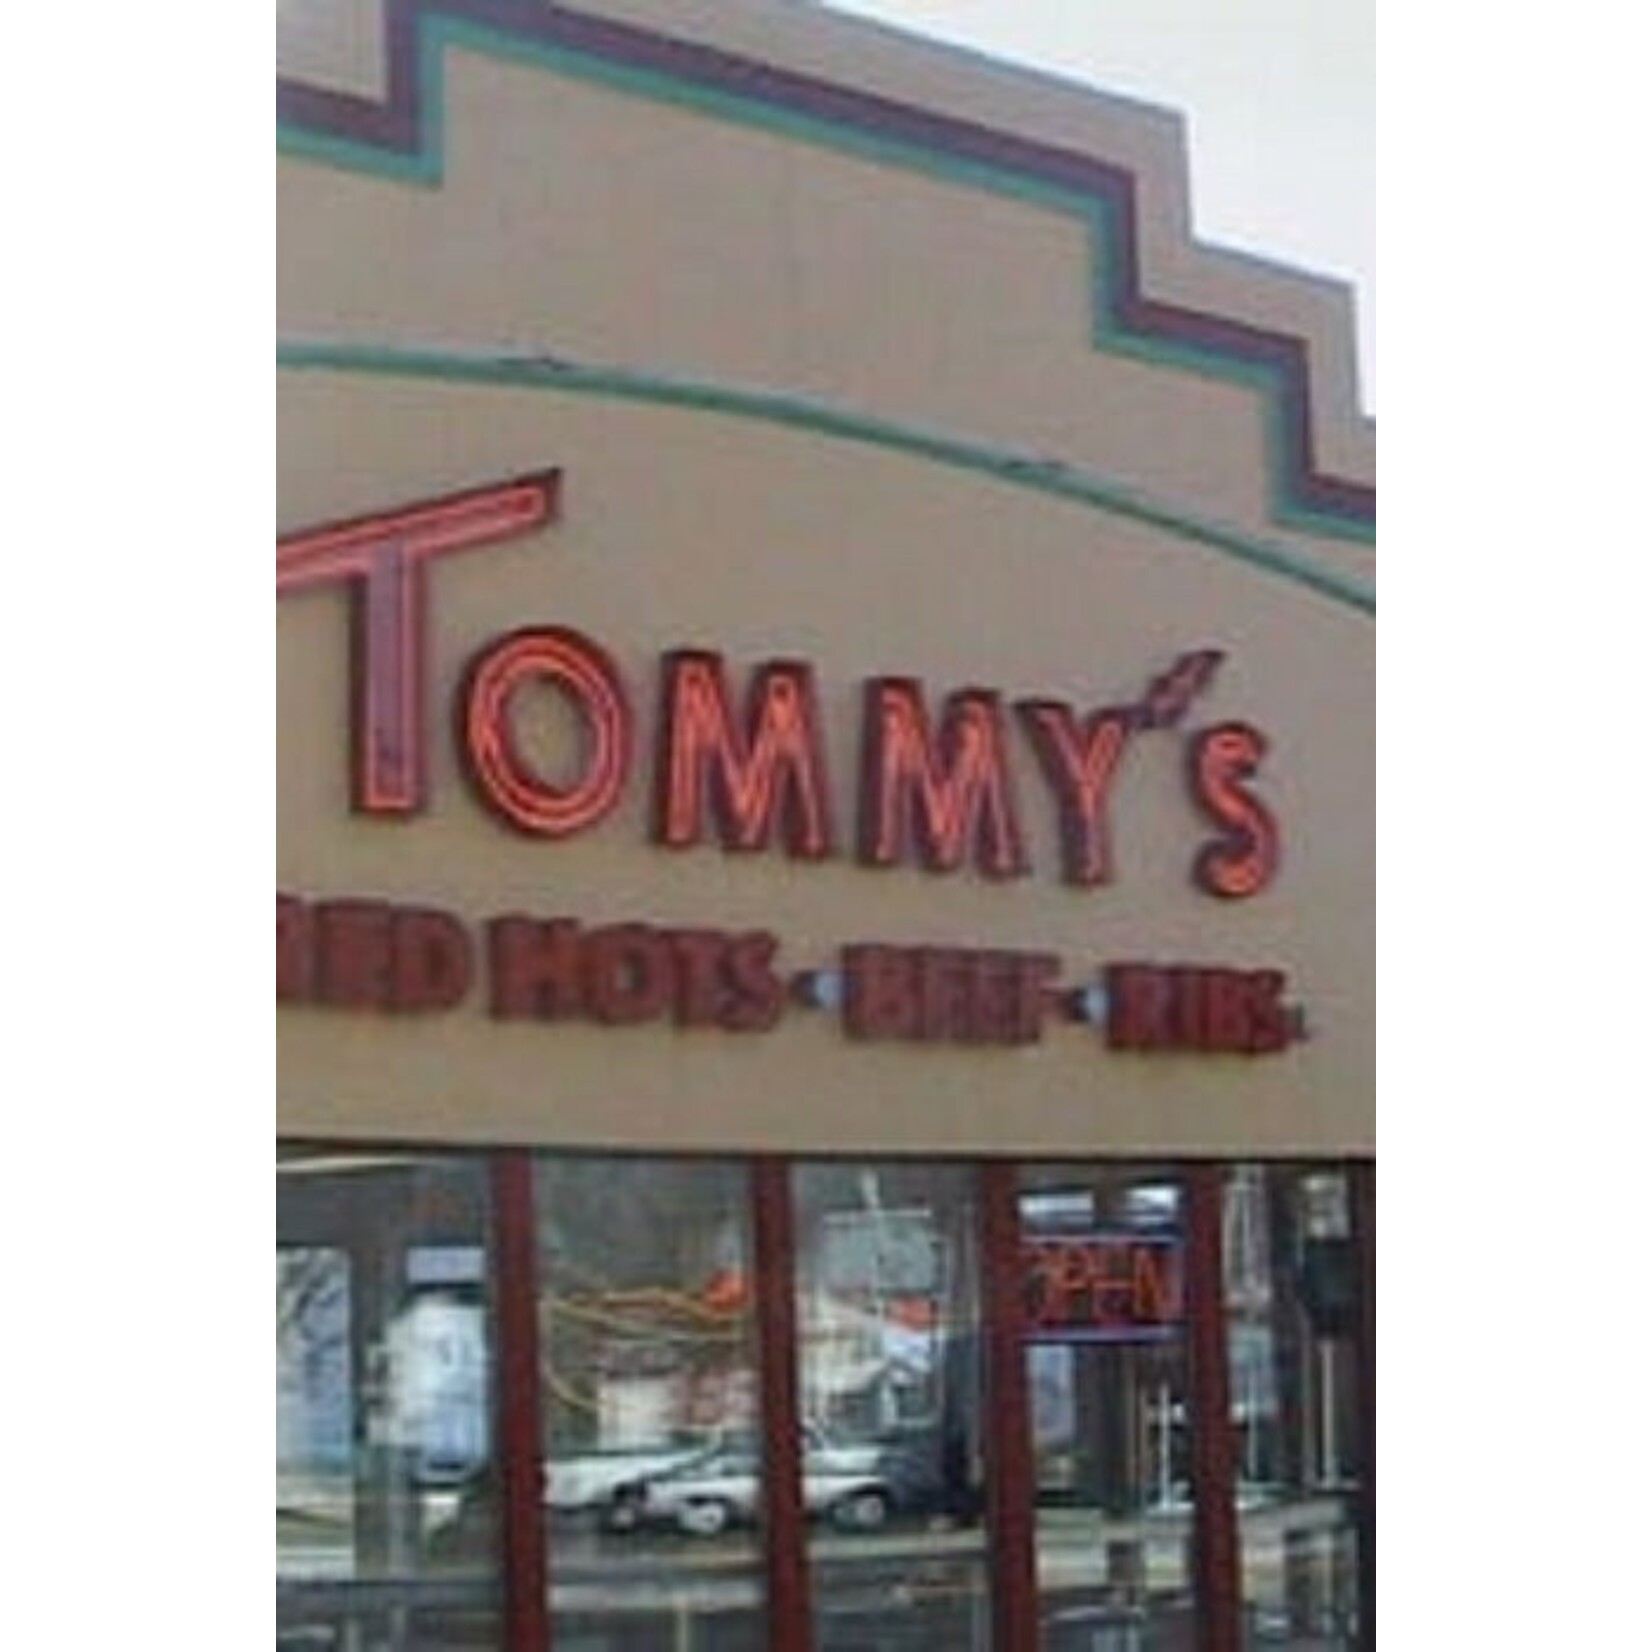 Tommy's Red Hots Tommy's Red Hots-Crystal Lake-Rt. 176 $10.00 Dining certificate